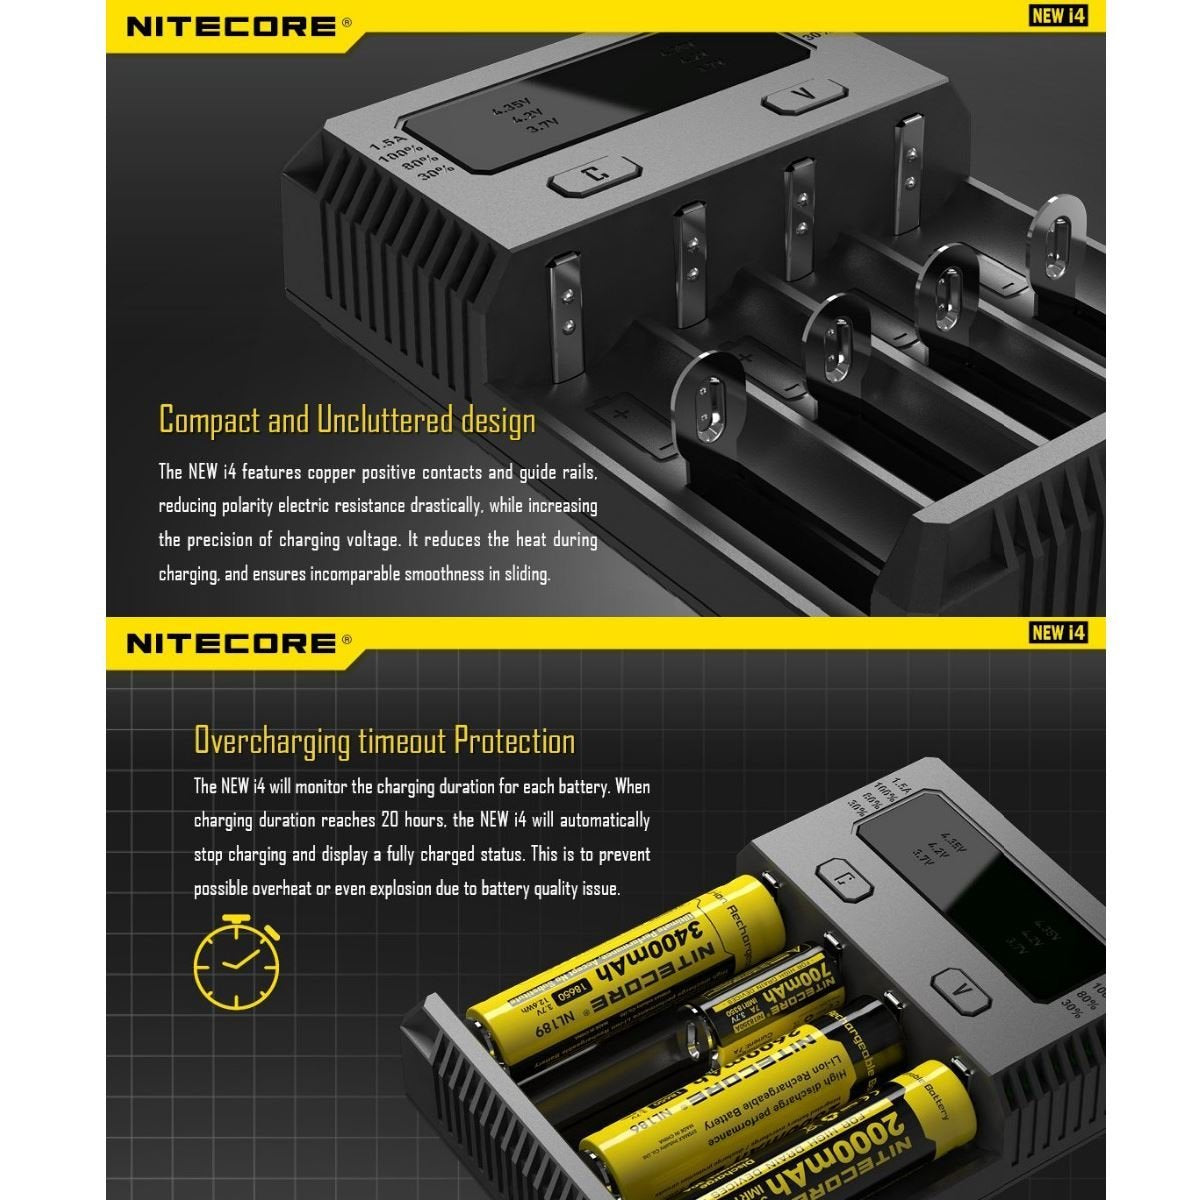 NITECORE New i4 Intellicharger 4 Bay Rechargeable Battery Charger